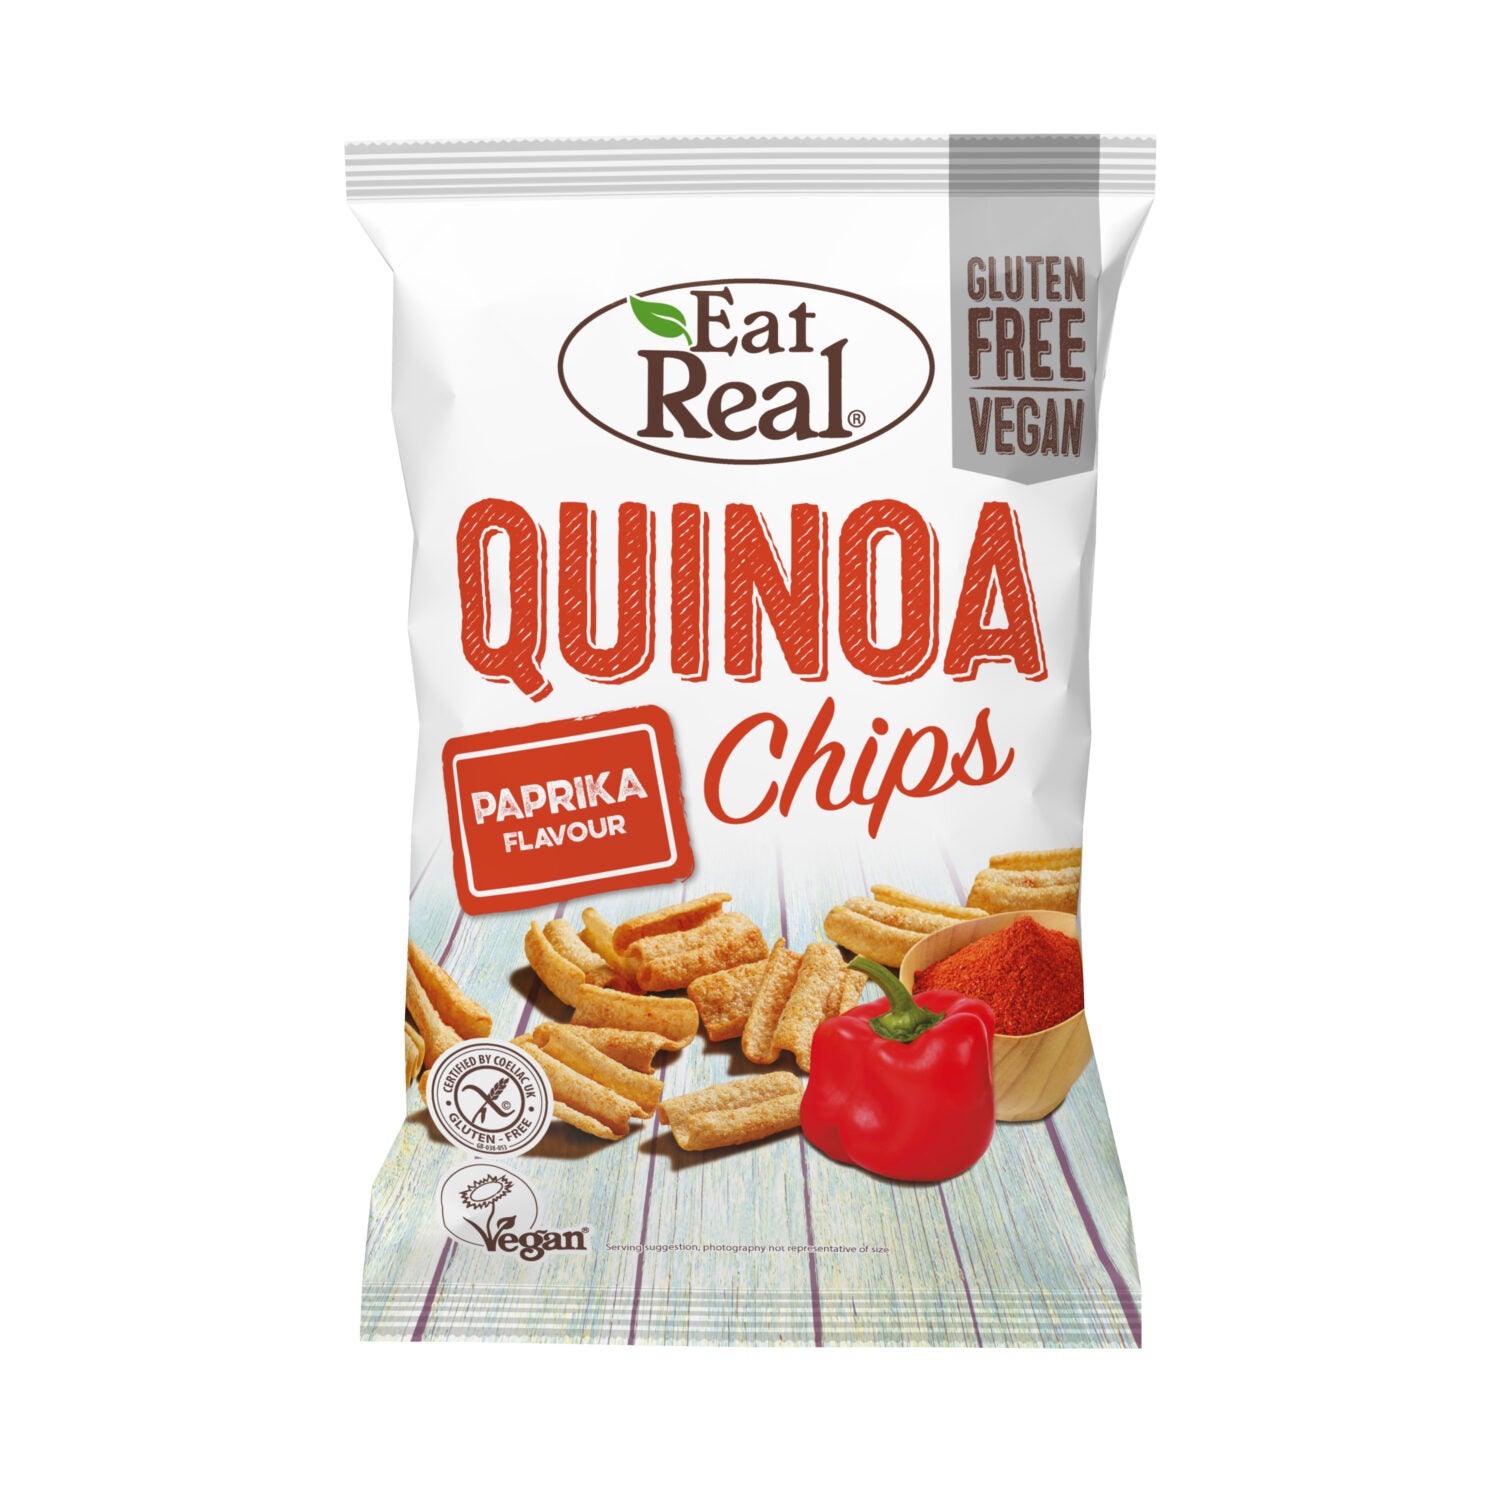 Eat Real Quinoa Chips Paprika